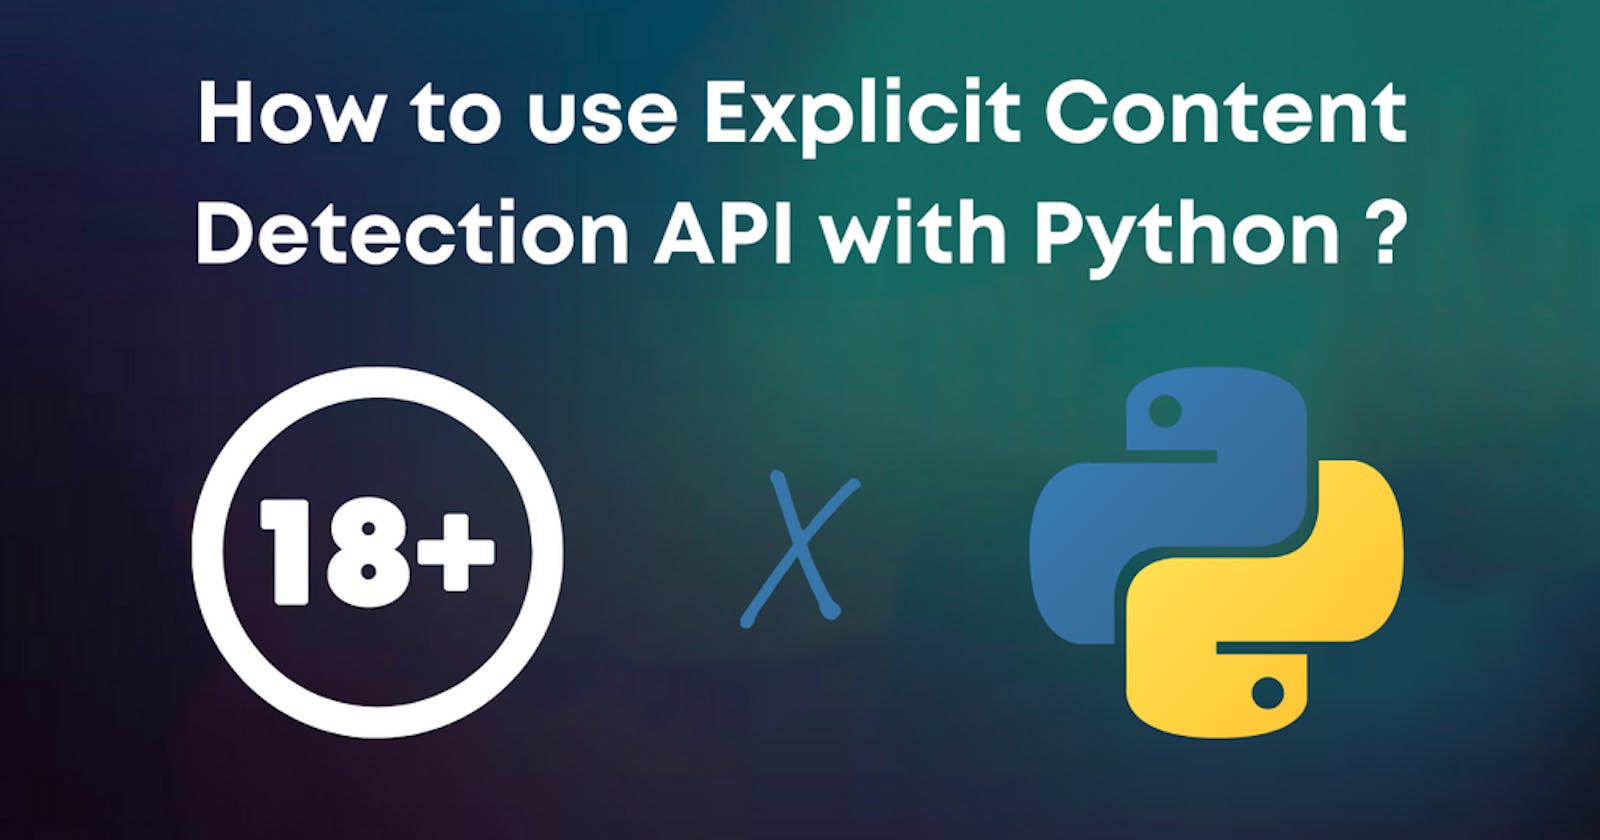 How to use Explicit Content Detection API with Python in 5 minutes?